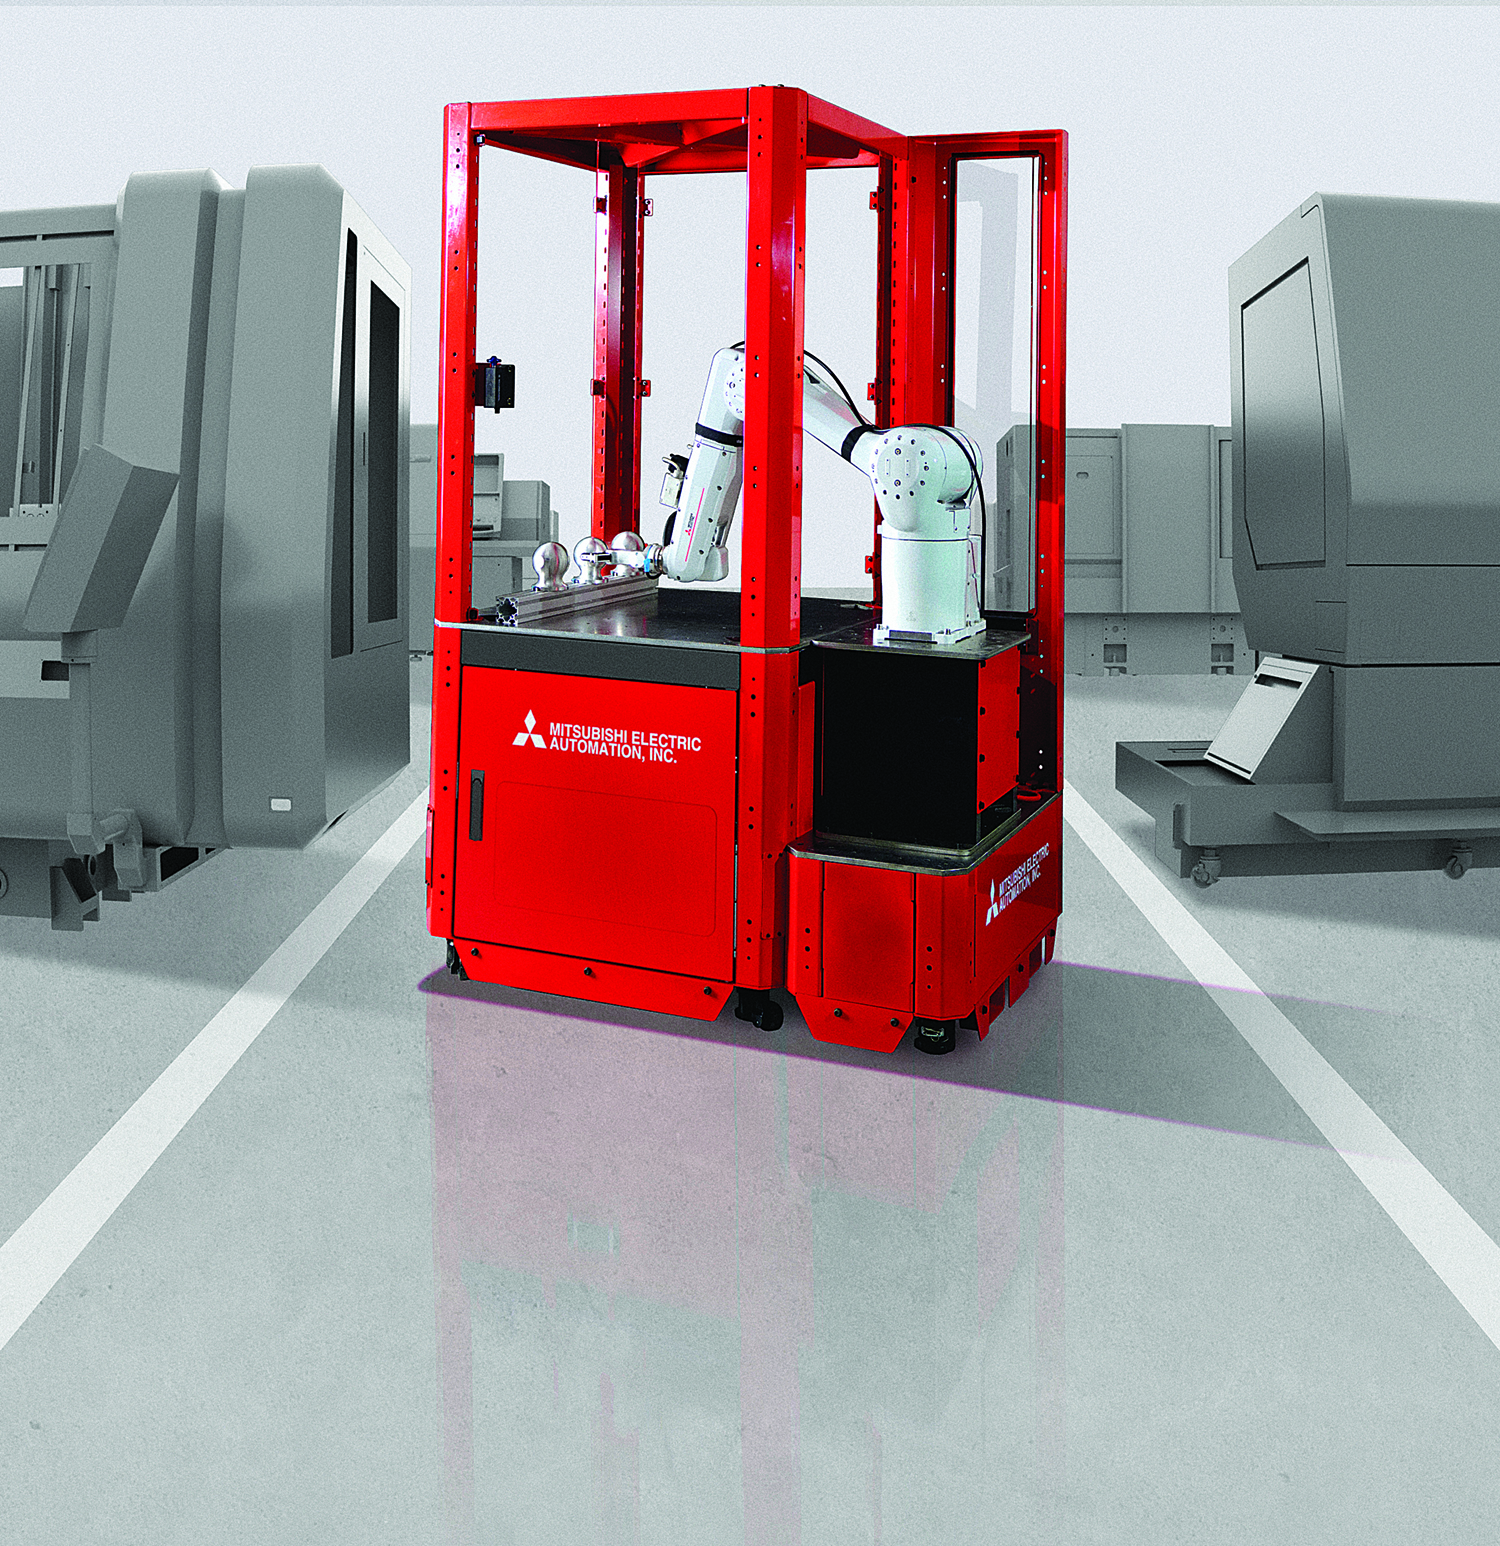 The LoadMate Plus cell is designed to make it easier for shops lacking automation experience to incorporate robotic part loading and unloading into their operations.